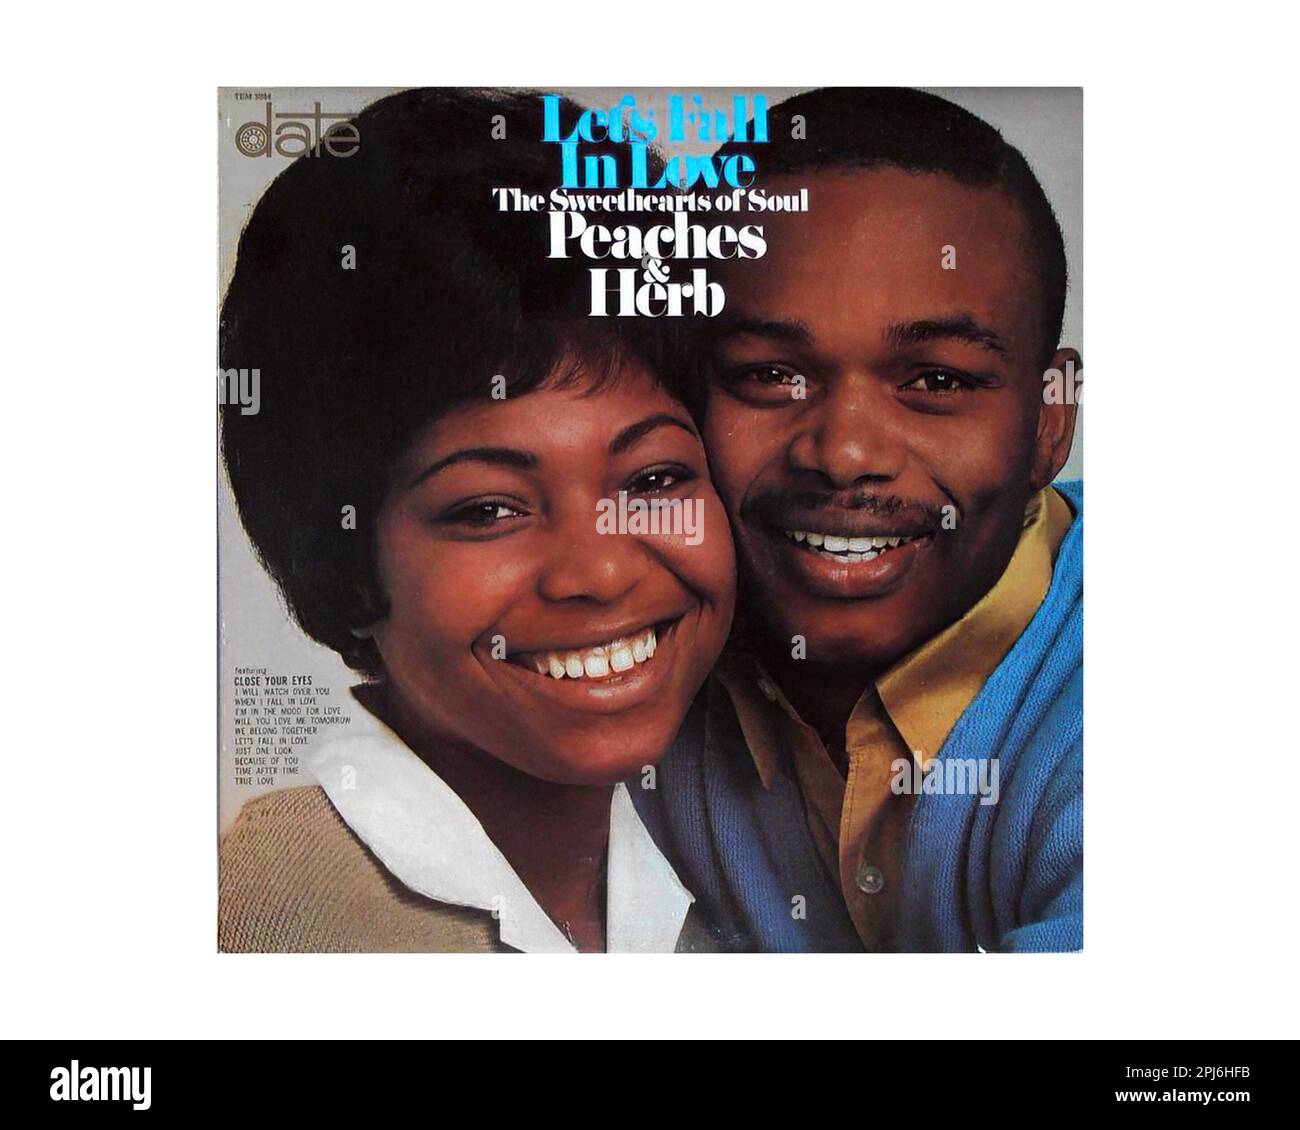 Peaches & Herb - We Belong Together 